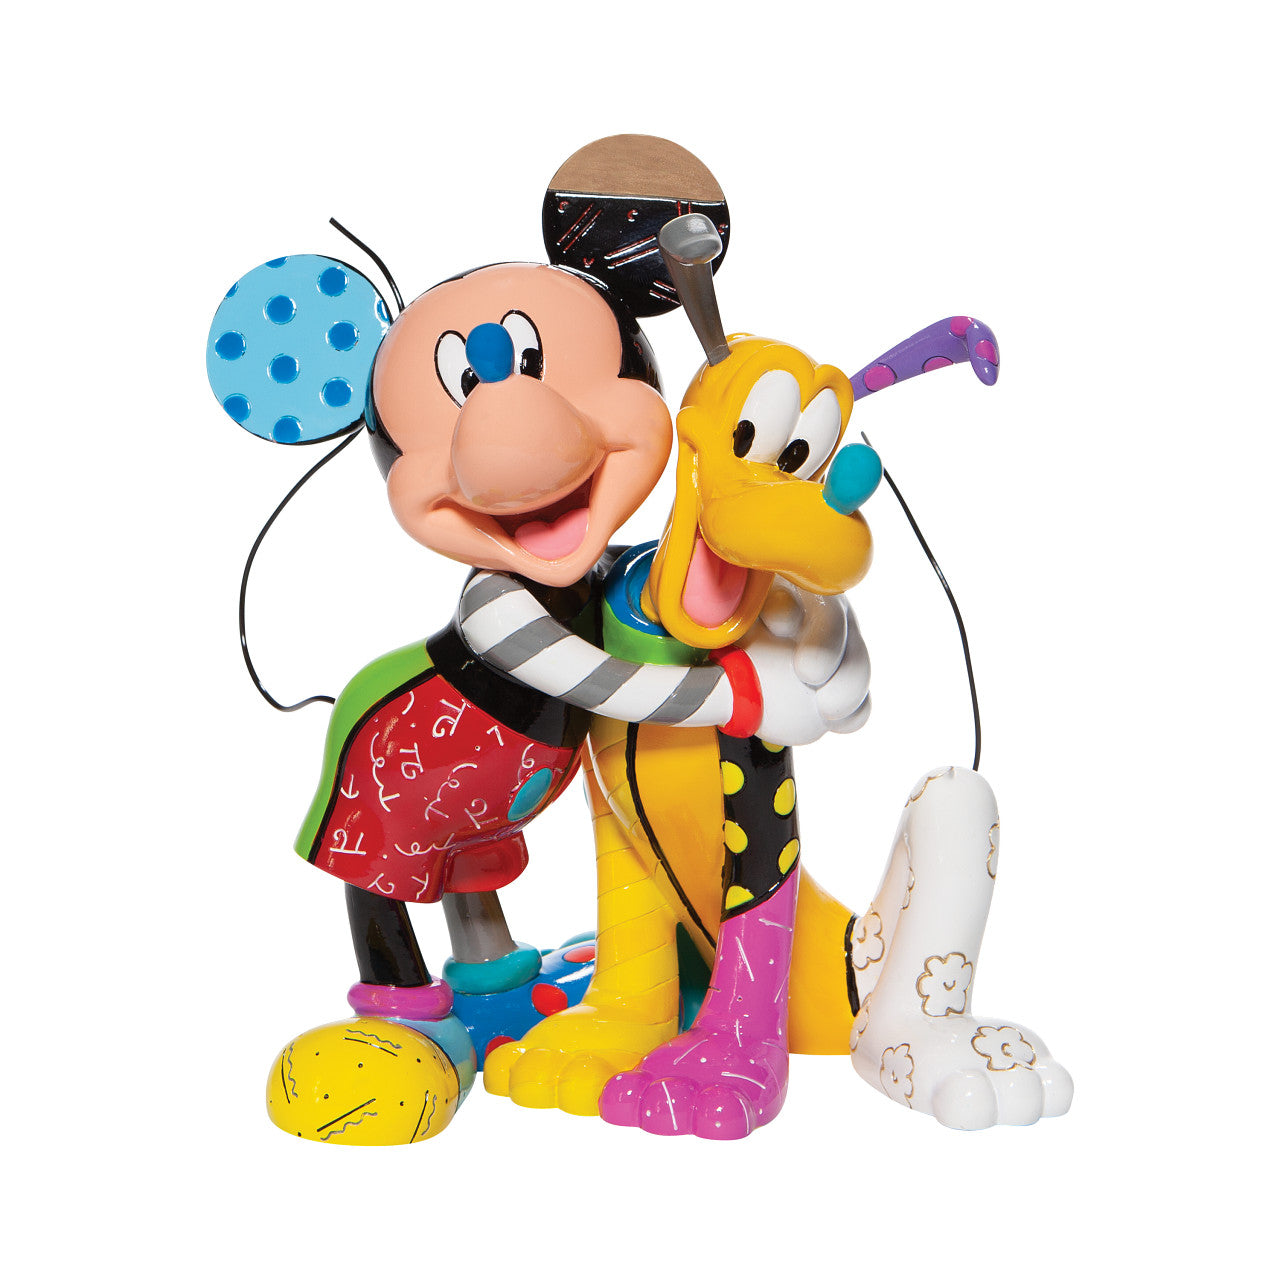 Mickey Mouse with Pluto Figurine